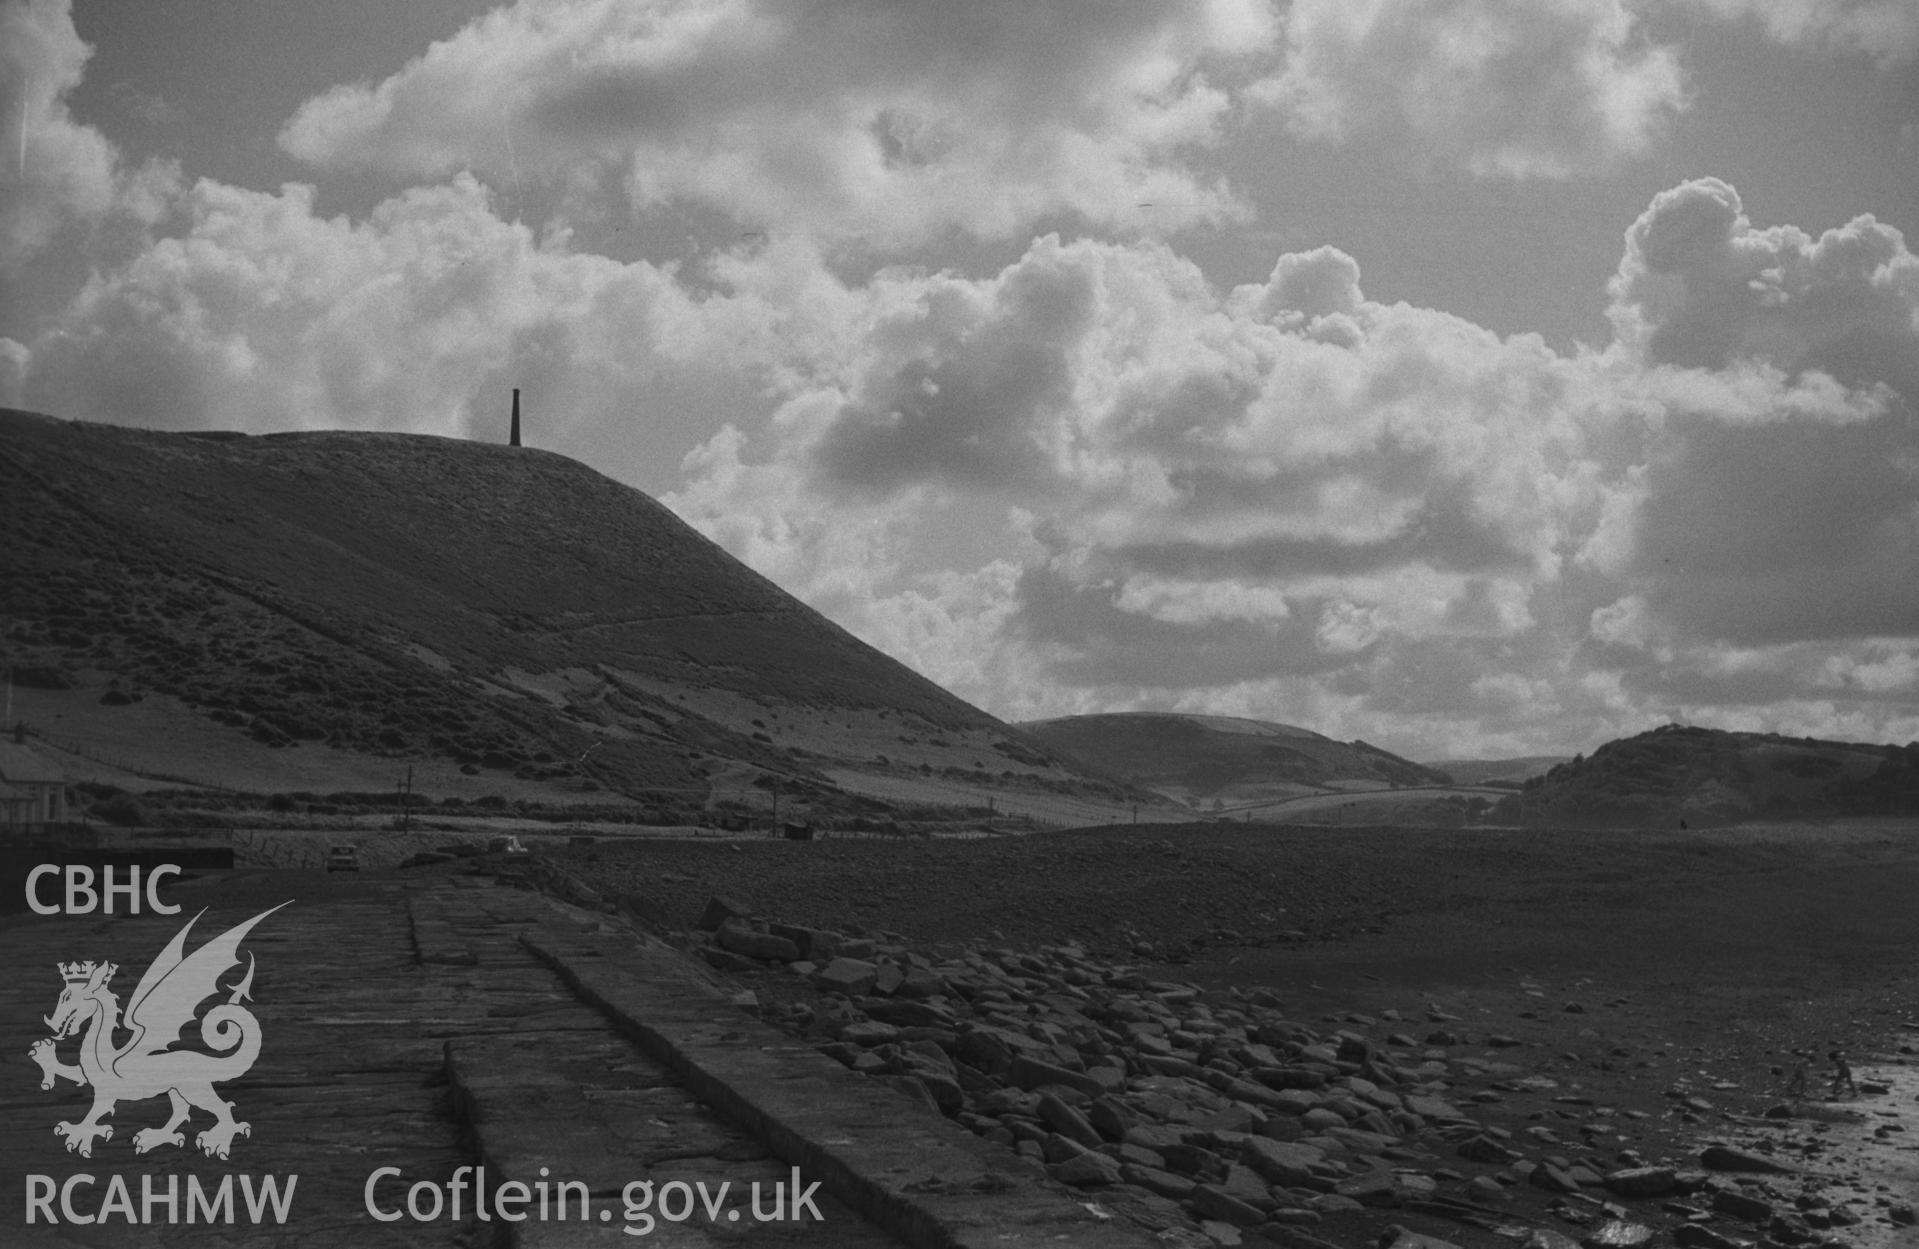 Digital copy of a black and white negative showing view of Pen Dinas and the Wellington Monument. Photographed by Arthur O. Chater in September 1964 from Tanybwlch pier, Aberystwyth. Grid Reference SN 5785 8078. (Panorama. Photograph 7 of 10).